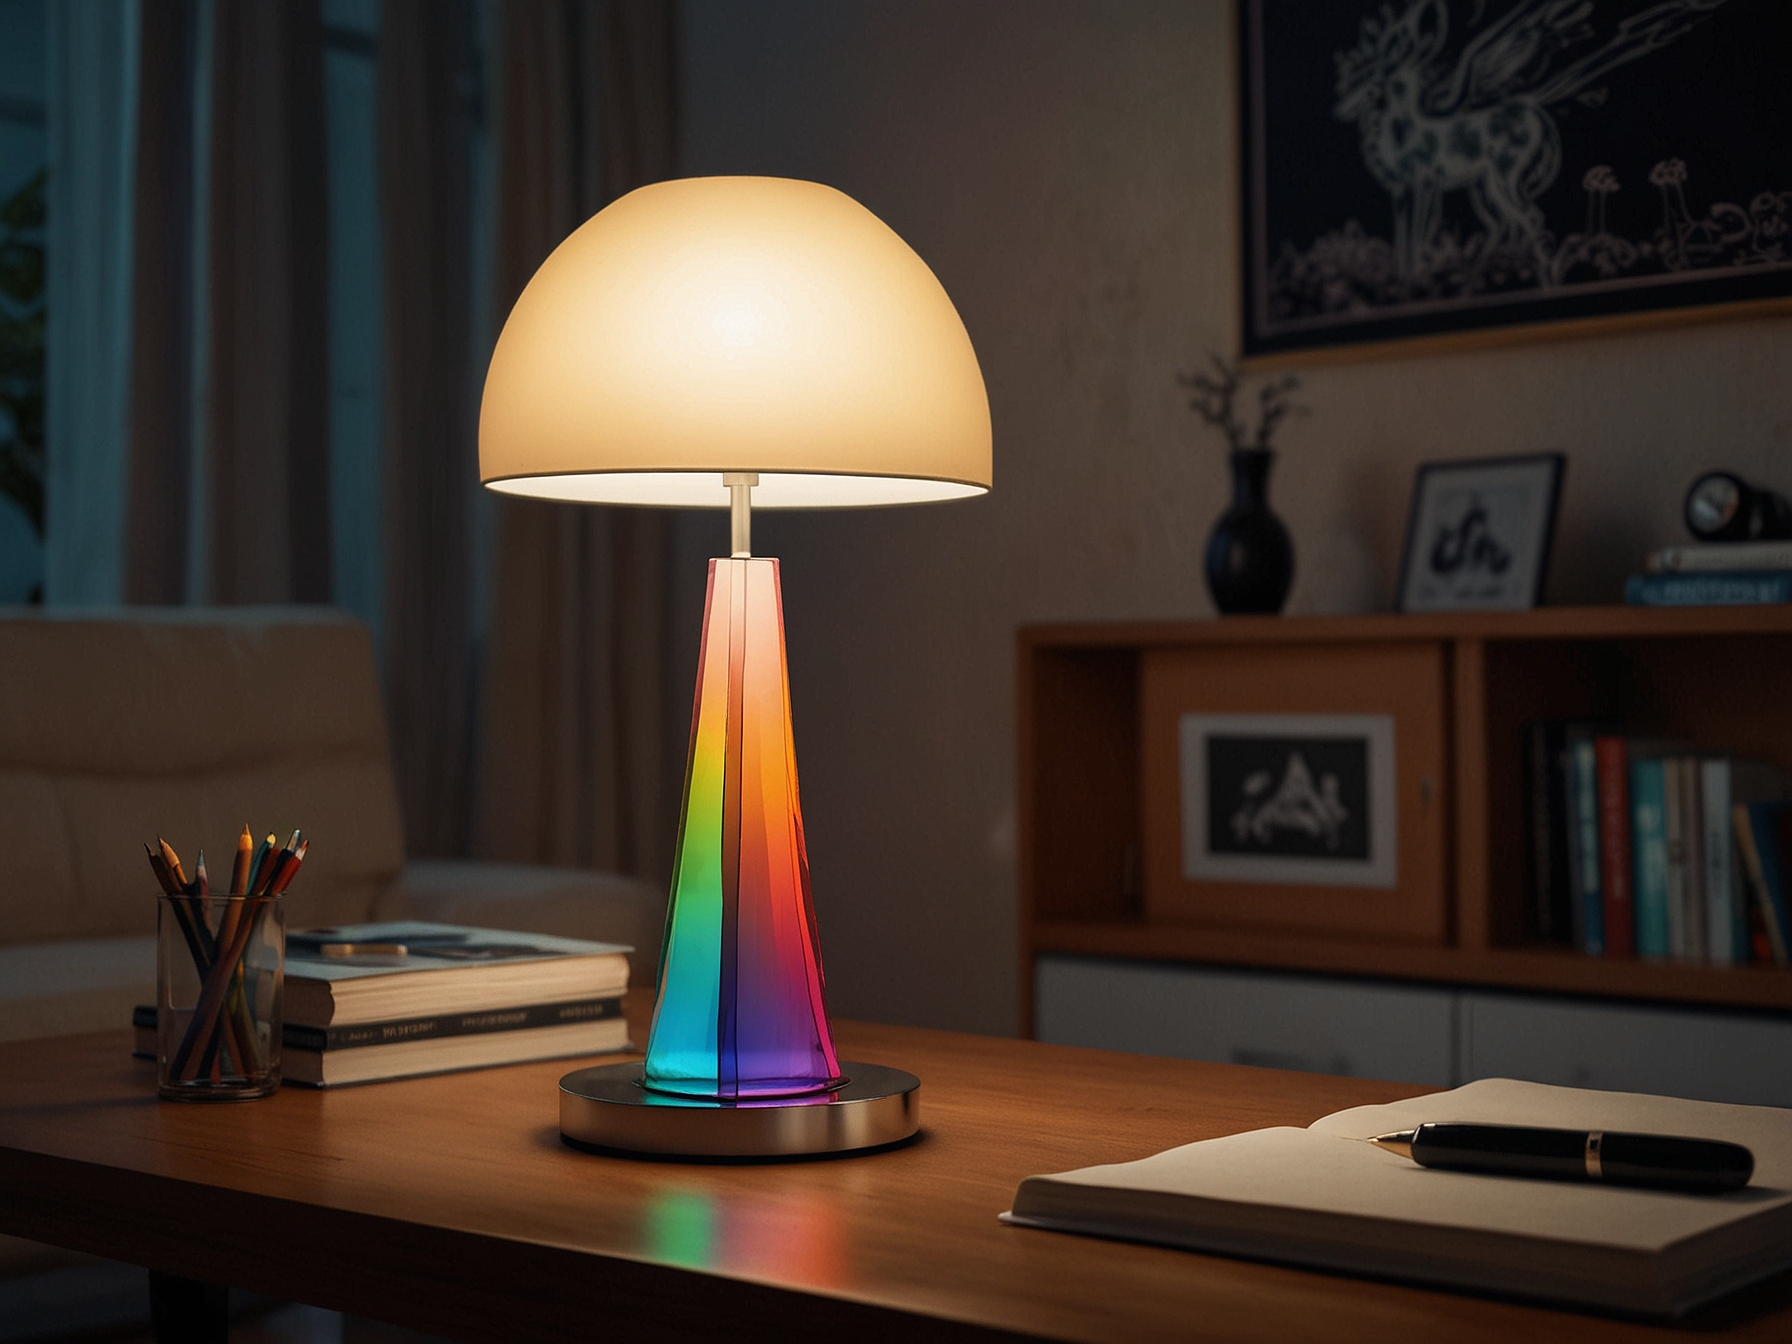 A stylish Hue table lamp emitting colorful light, placed on a living room table, showing its modern design and ability to enhance room ambiance through smart controls.